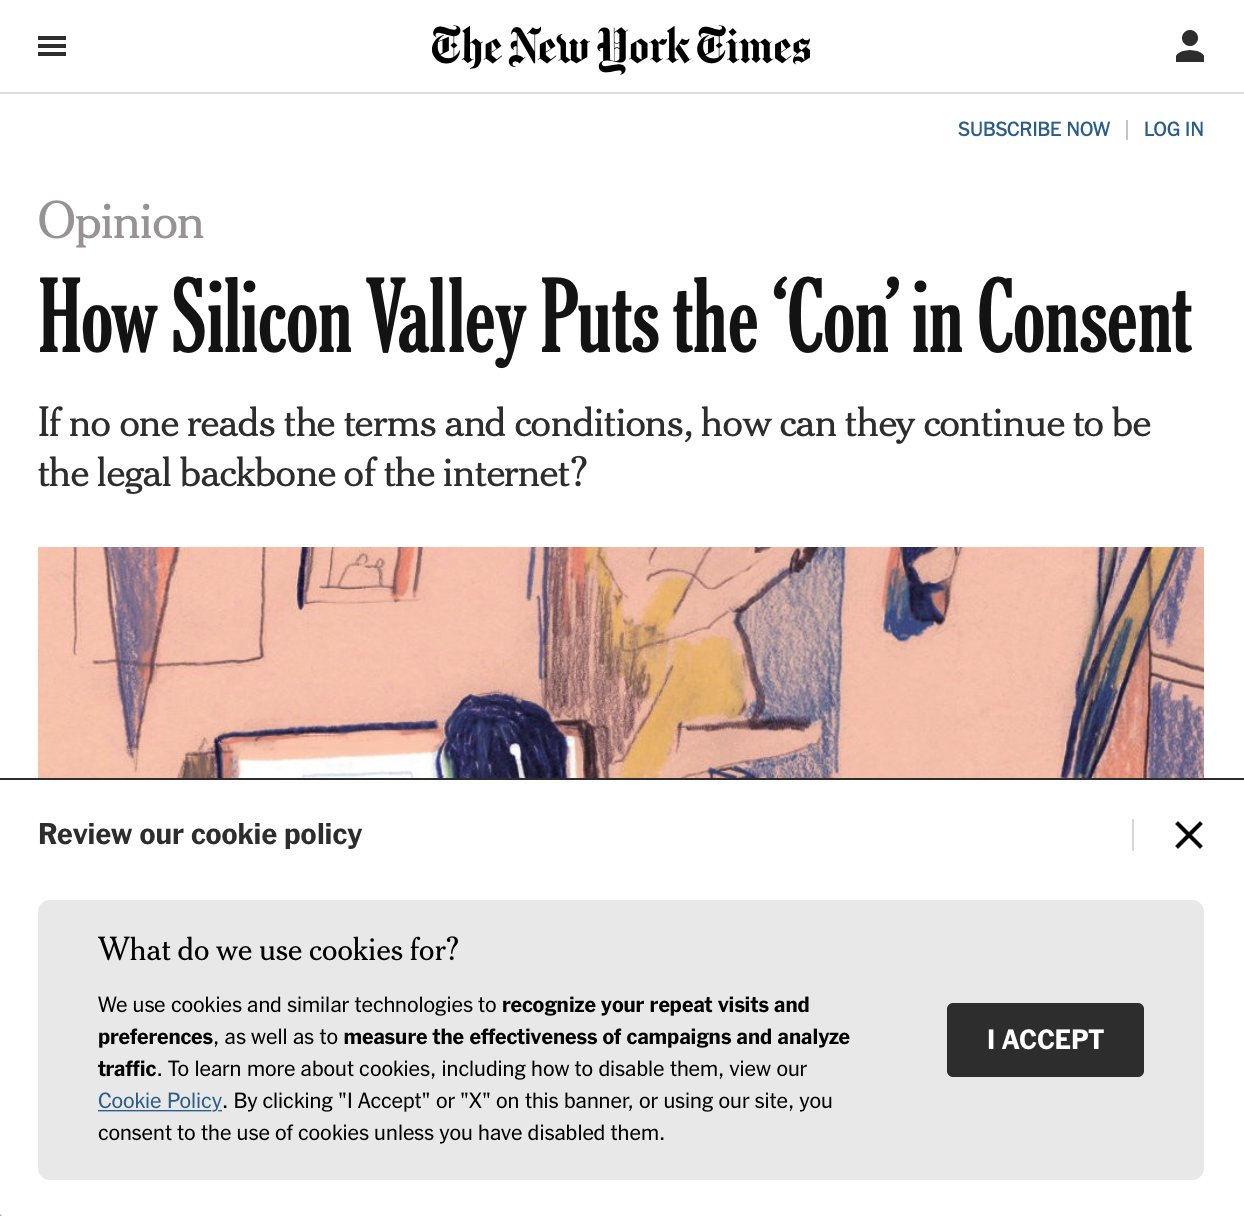 Screenshot of The New York Times article “if no one reads the terms and conditions, how can they continue to be the legal backbone of the internet” with a modal dialog asking the reader to accept the terms and conditions for cookies on the site.